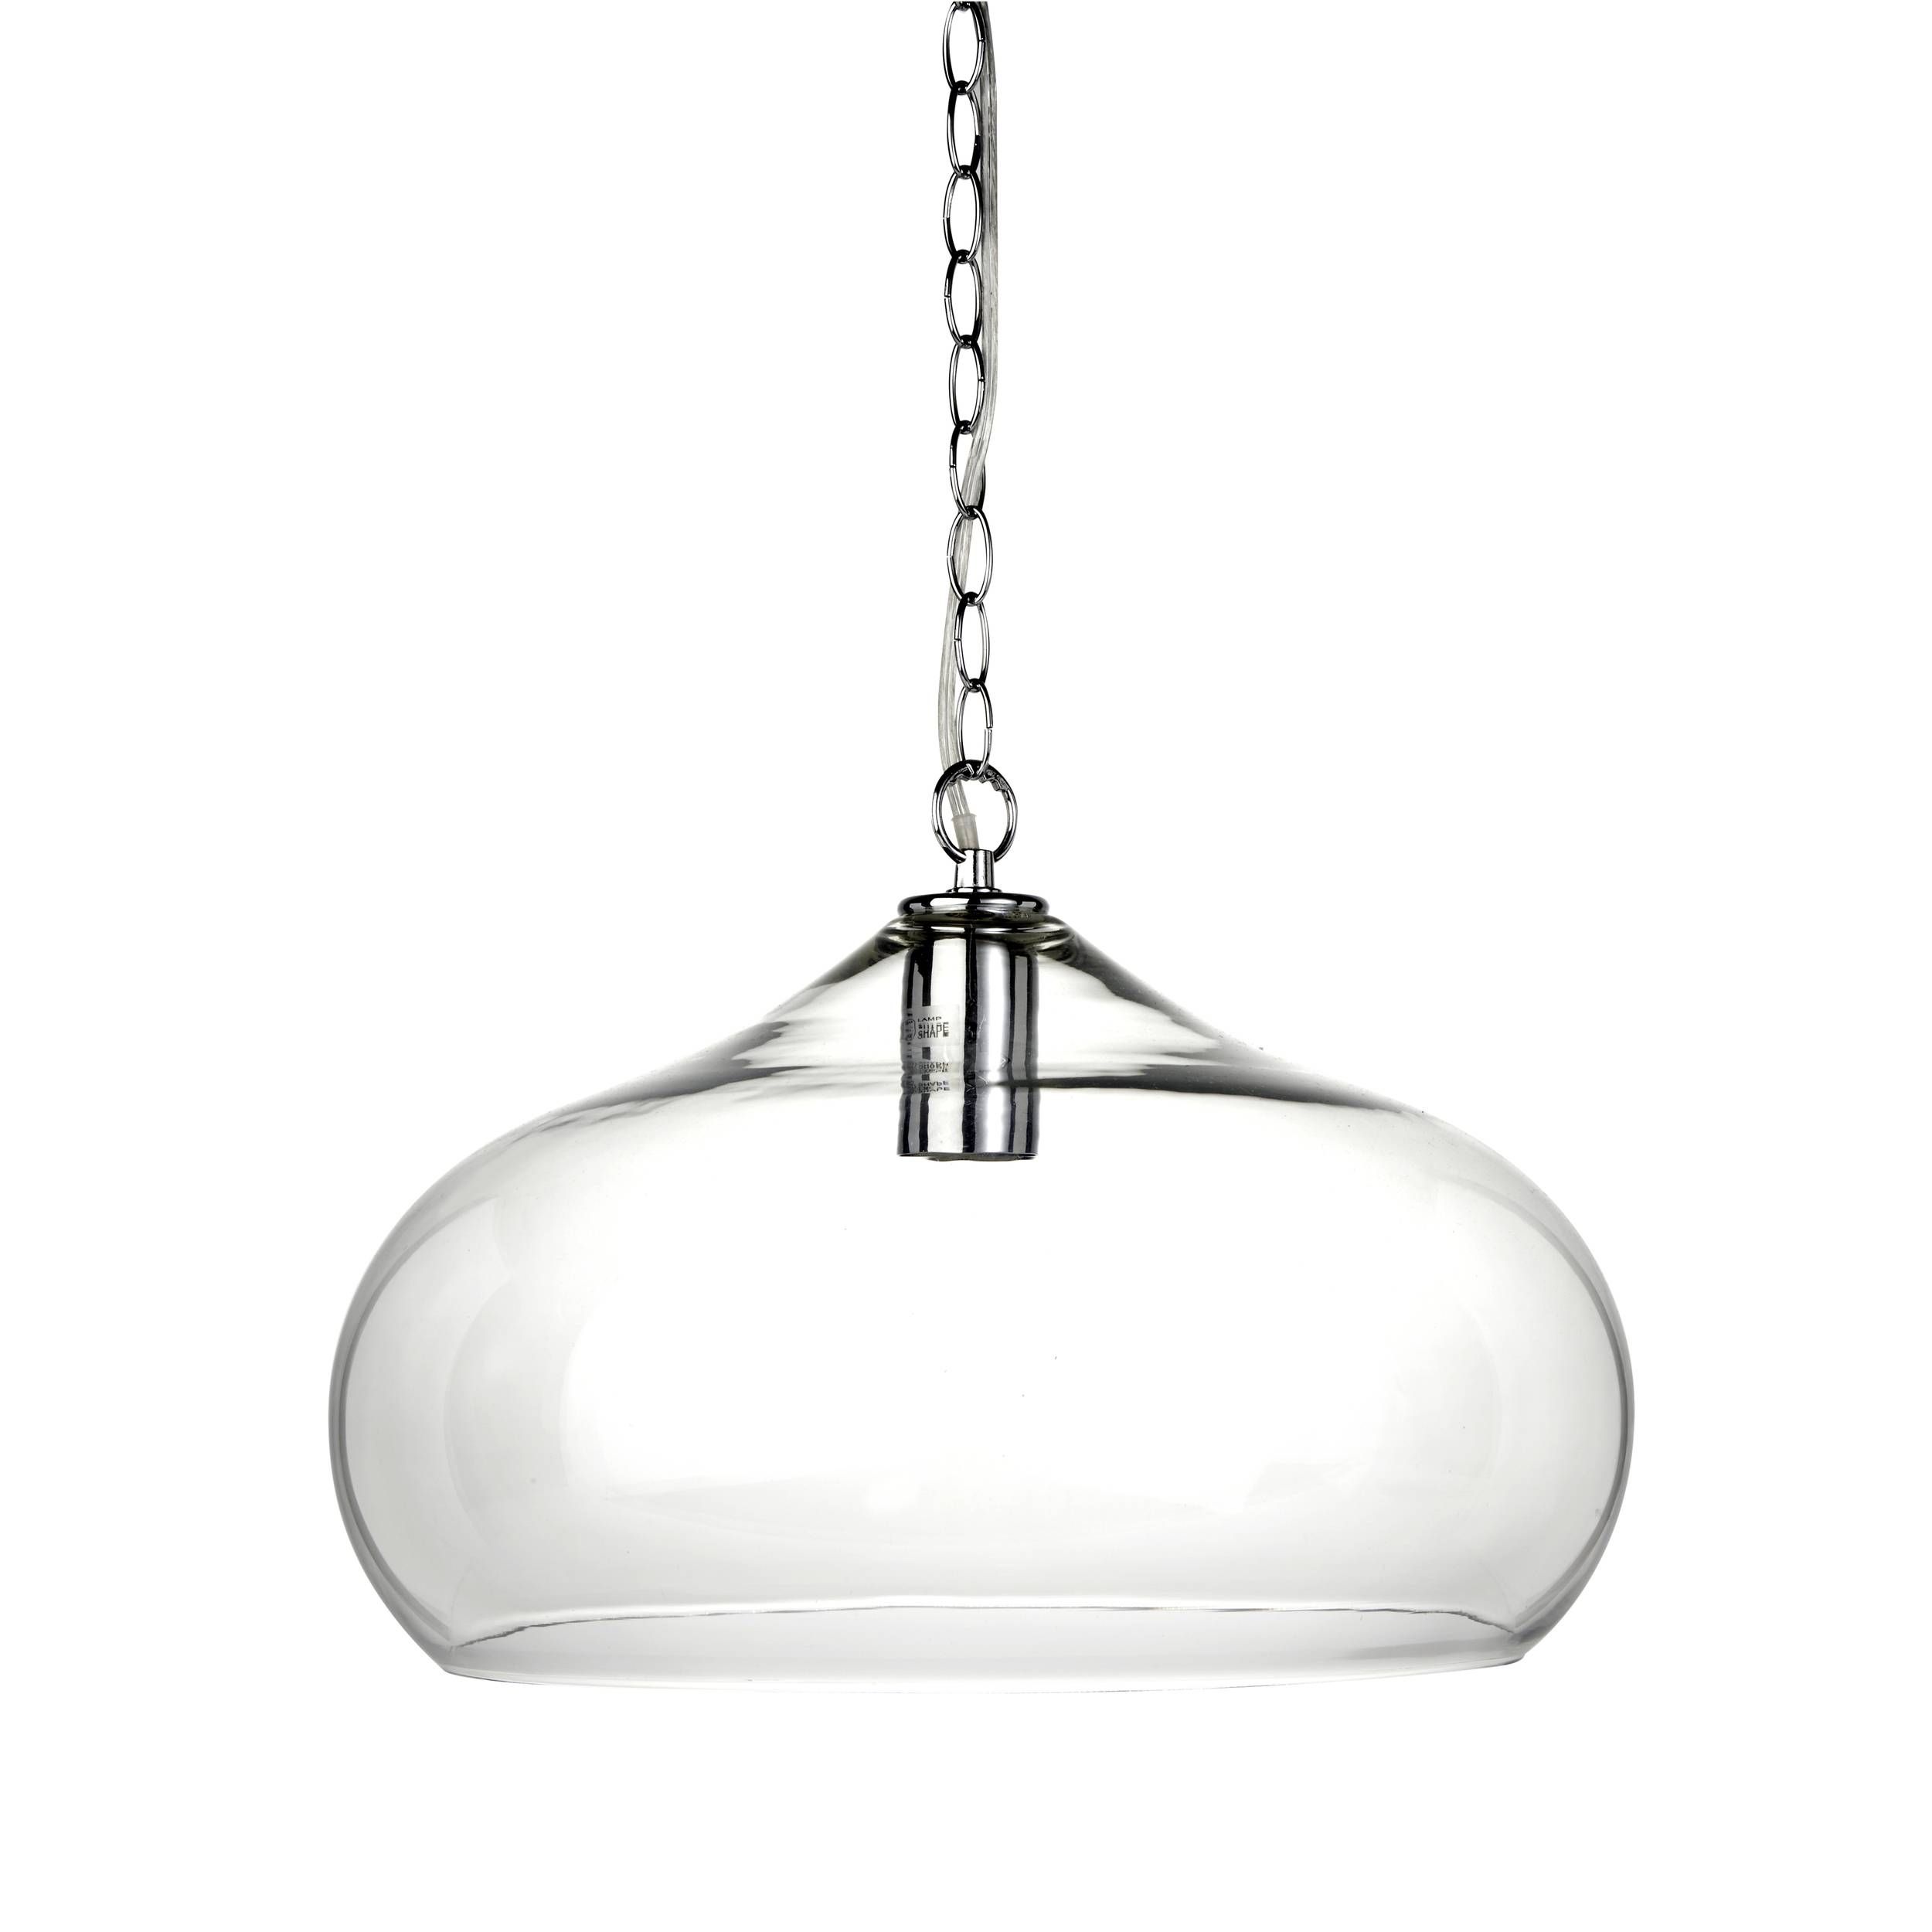 Eva Glass Ceiling Pendant At Laura Ashley With Eva Pendant Lights (View 4 of 15)